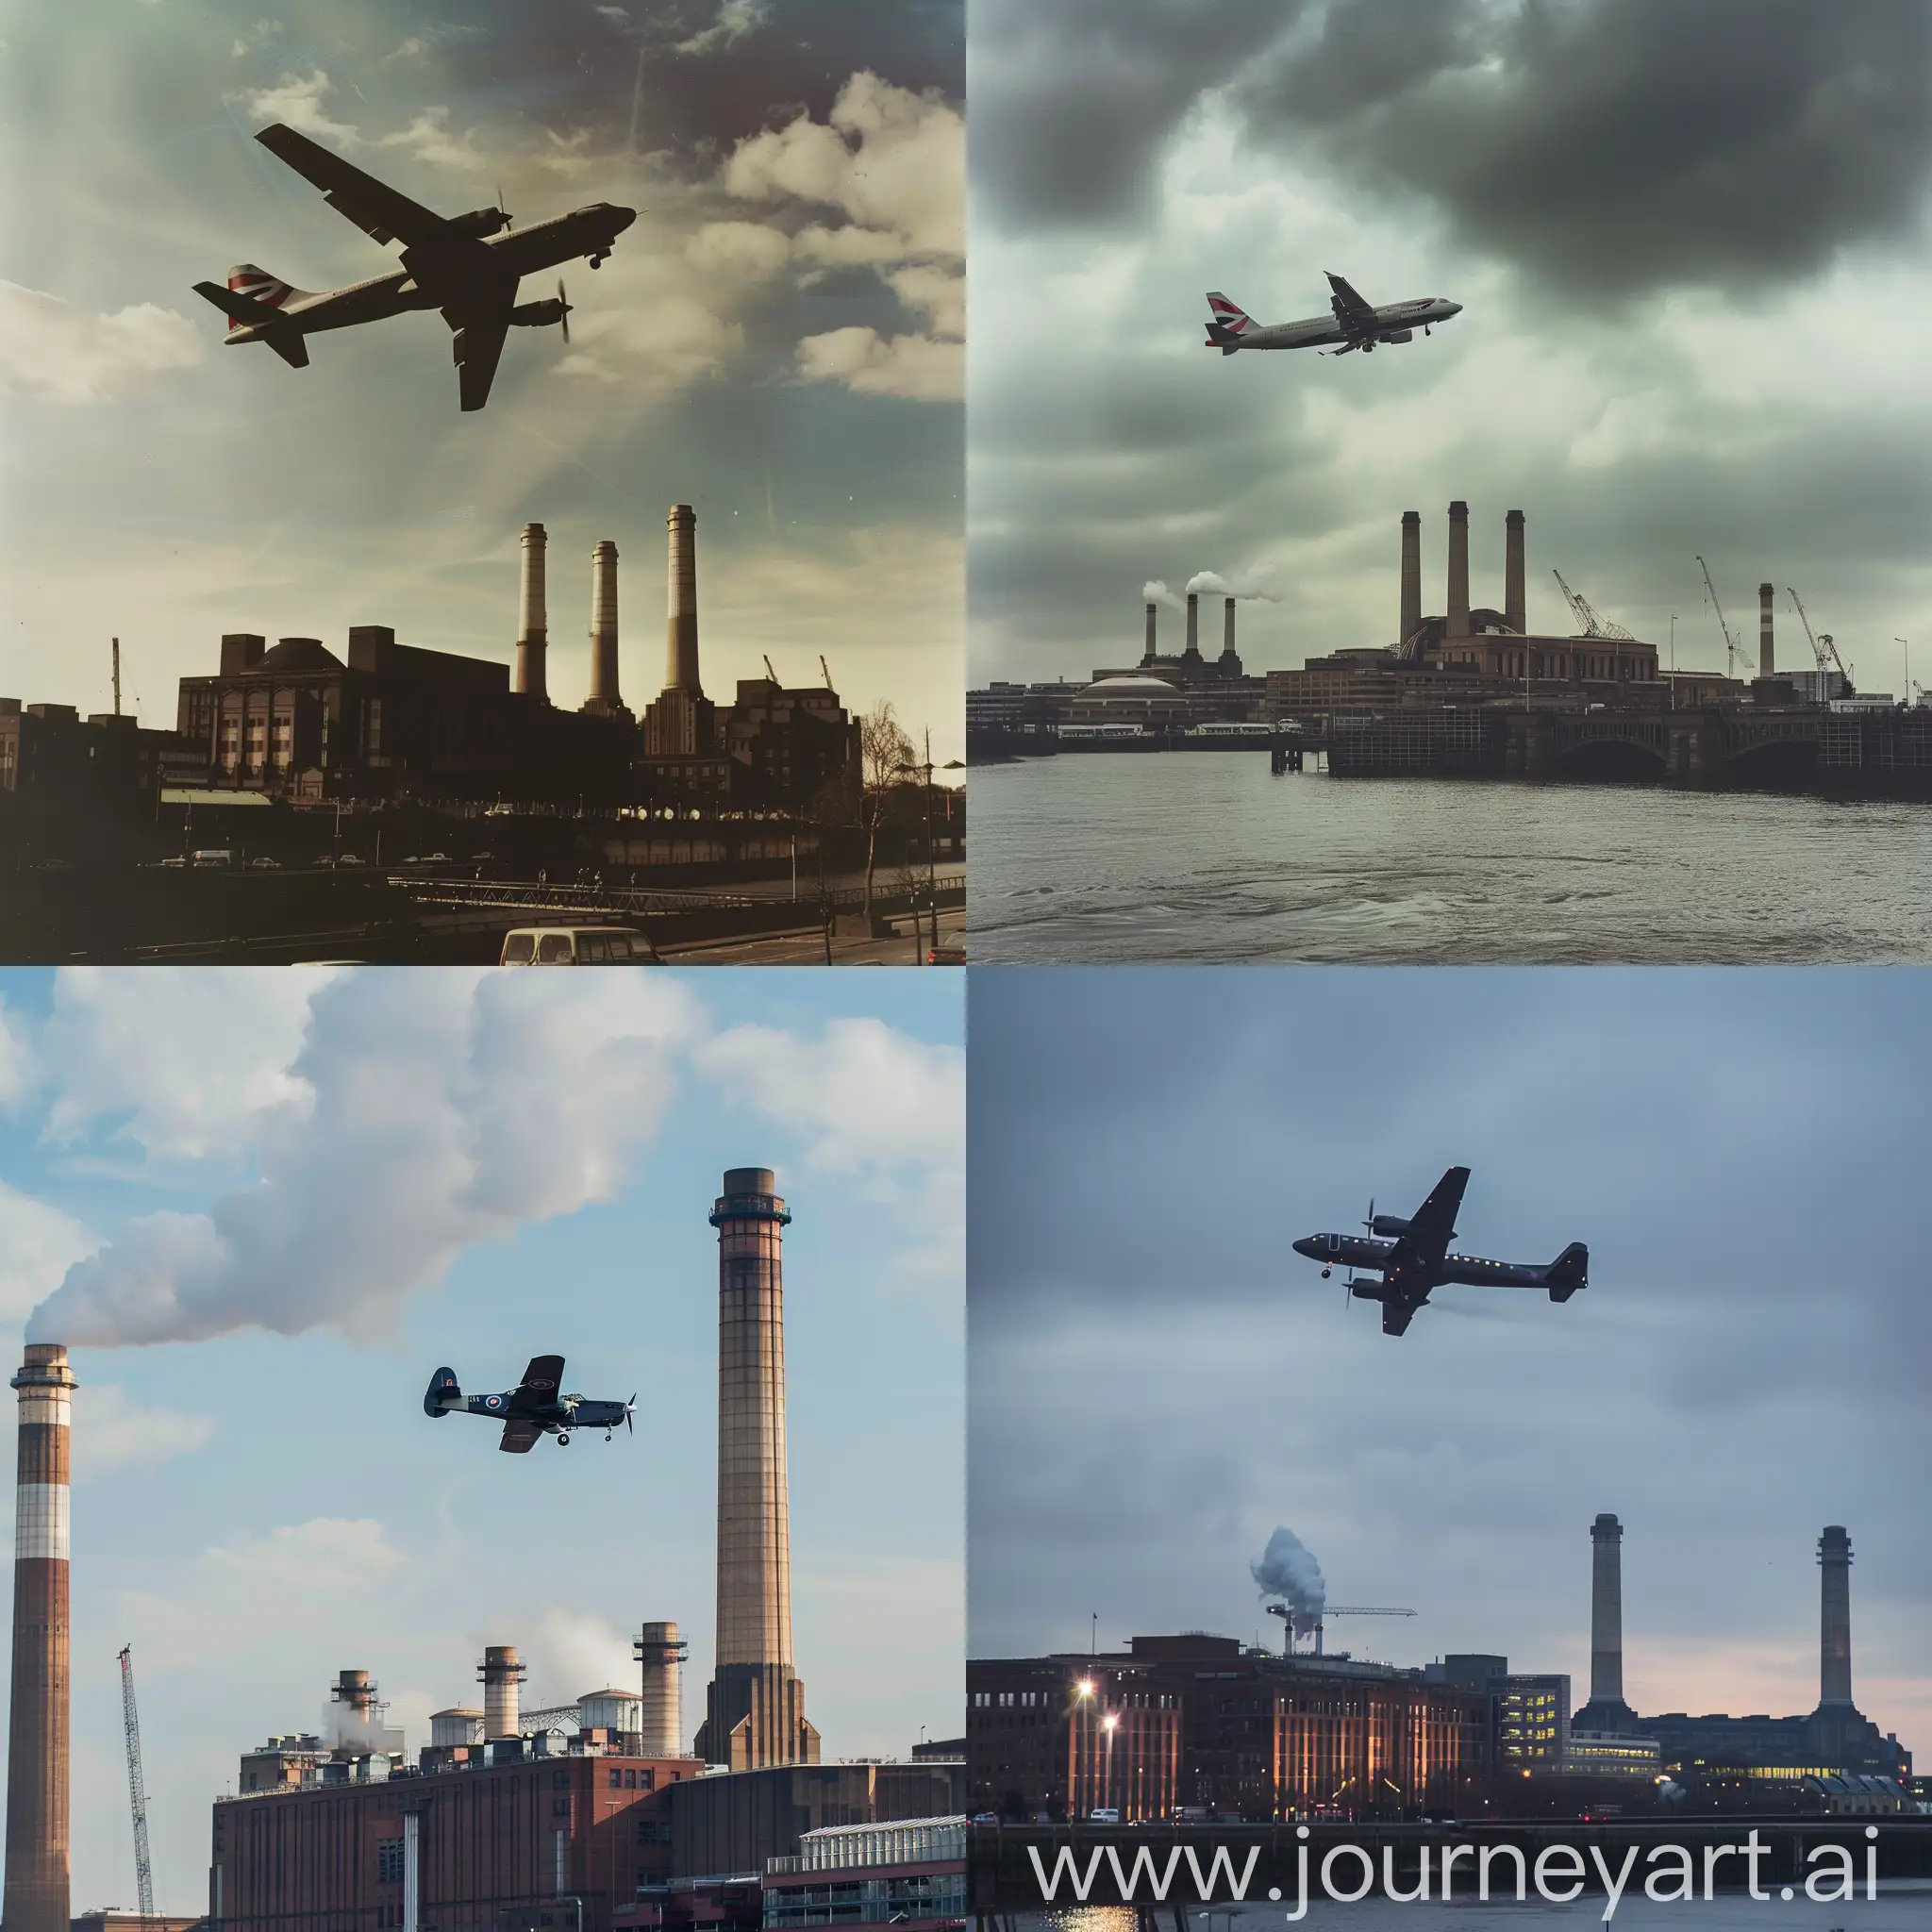 Roger-Waters-Piloting-Plane-Over-Battersea-Power-Station